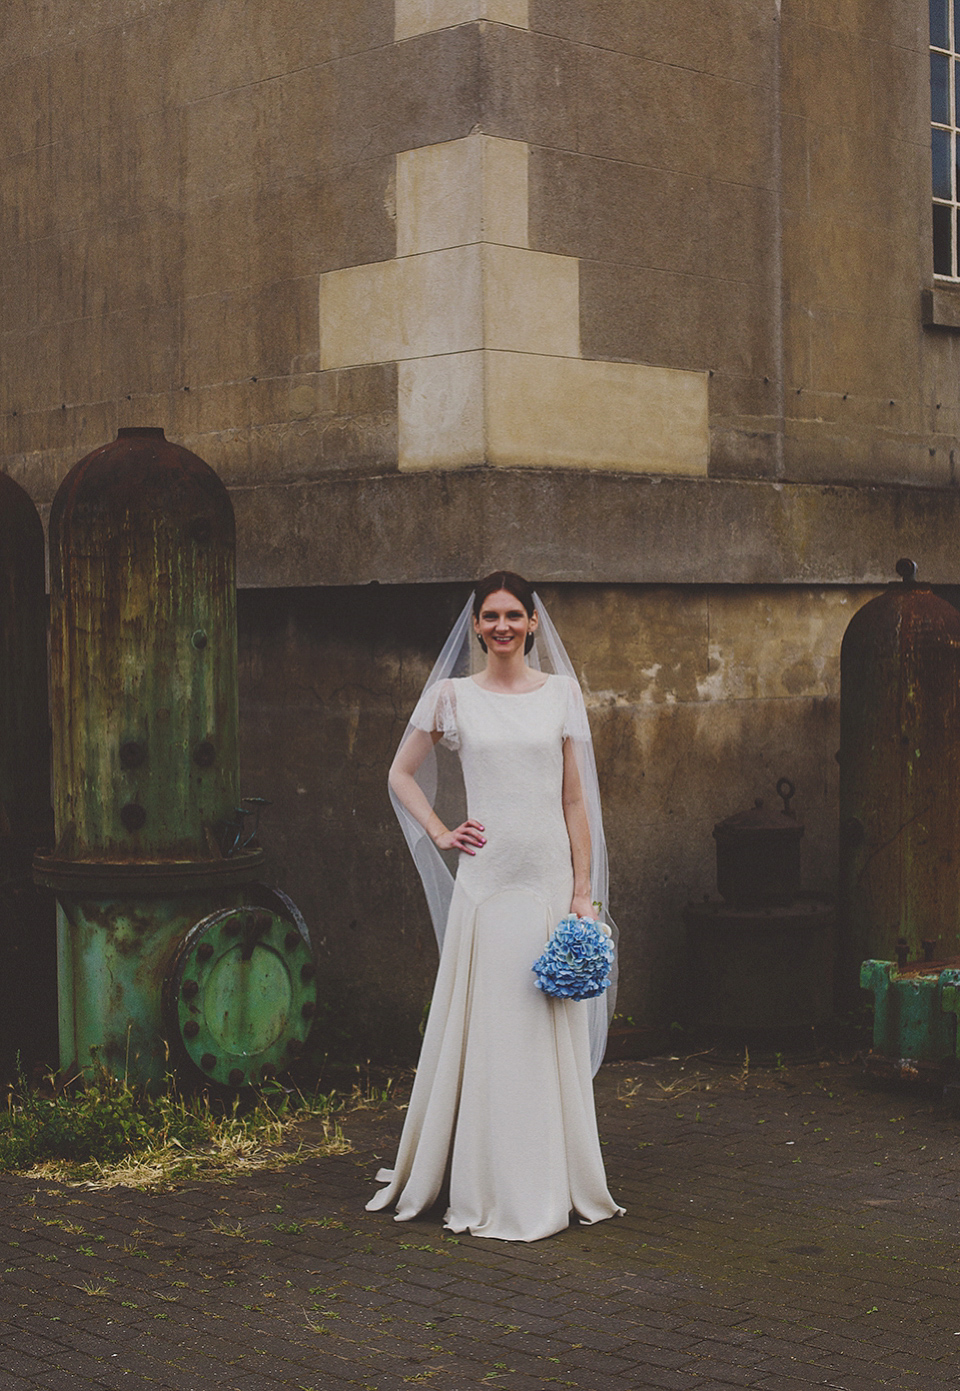 Bride Anna wore a Belle & Bunty gown that she purchased at Miss Bush Bridal of Surrey for her quirky London wedding. Photography by Howell Jones.